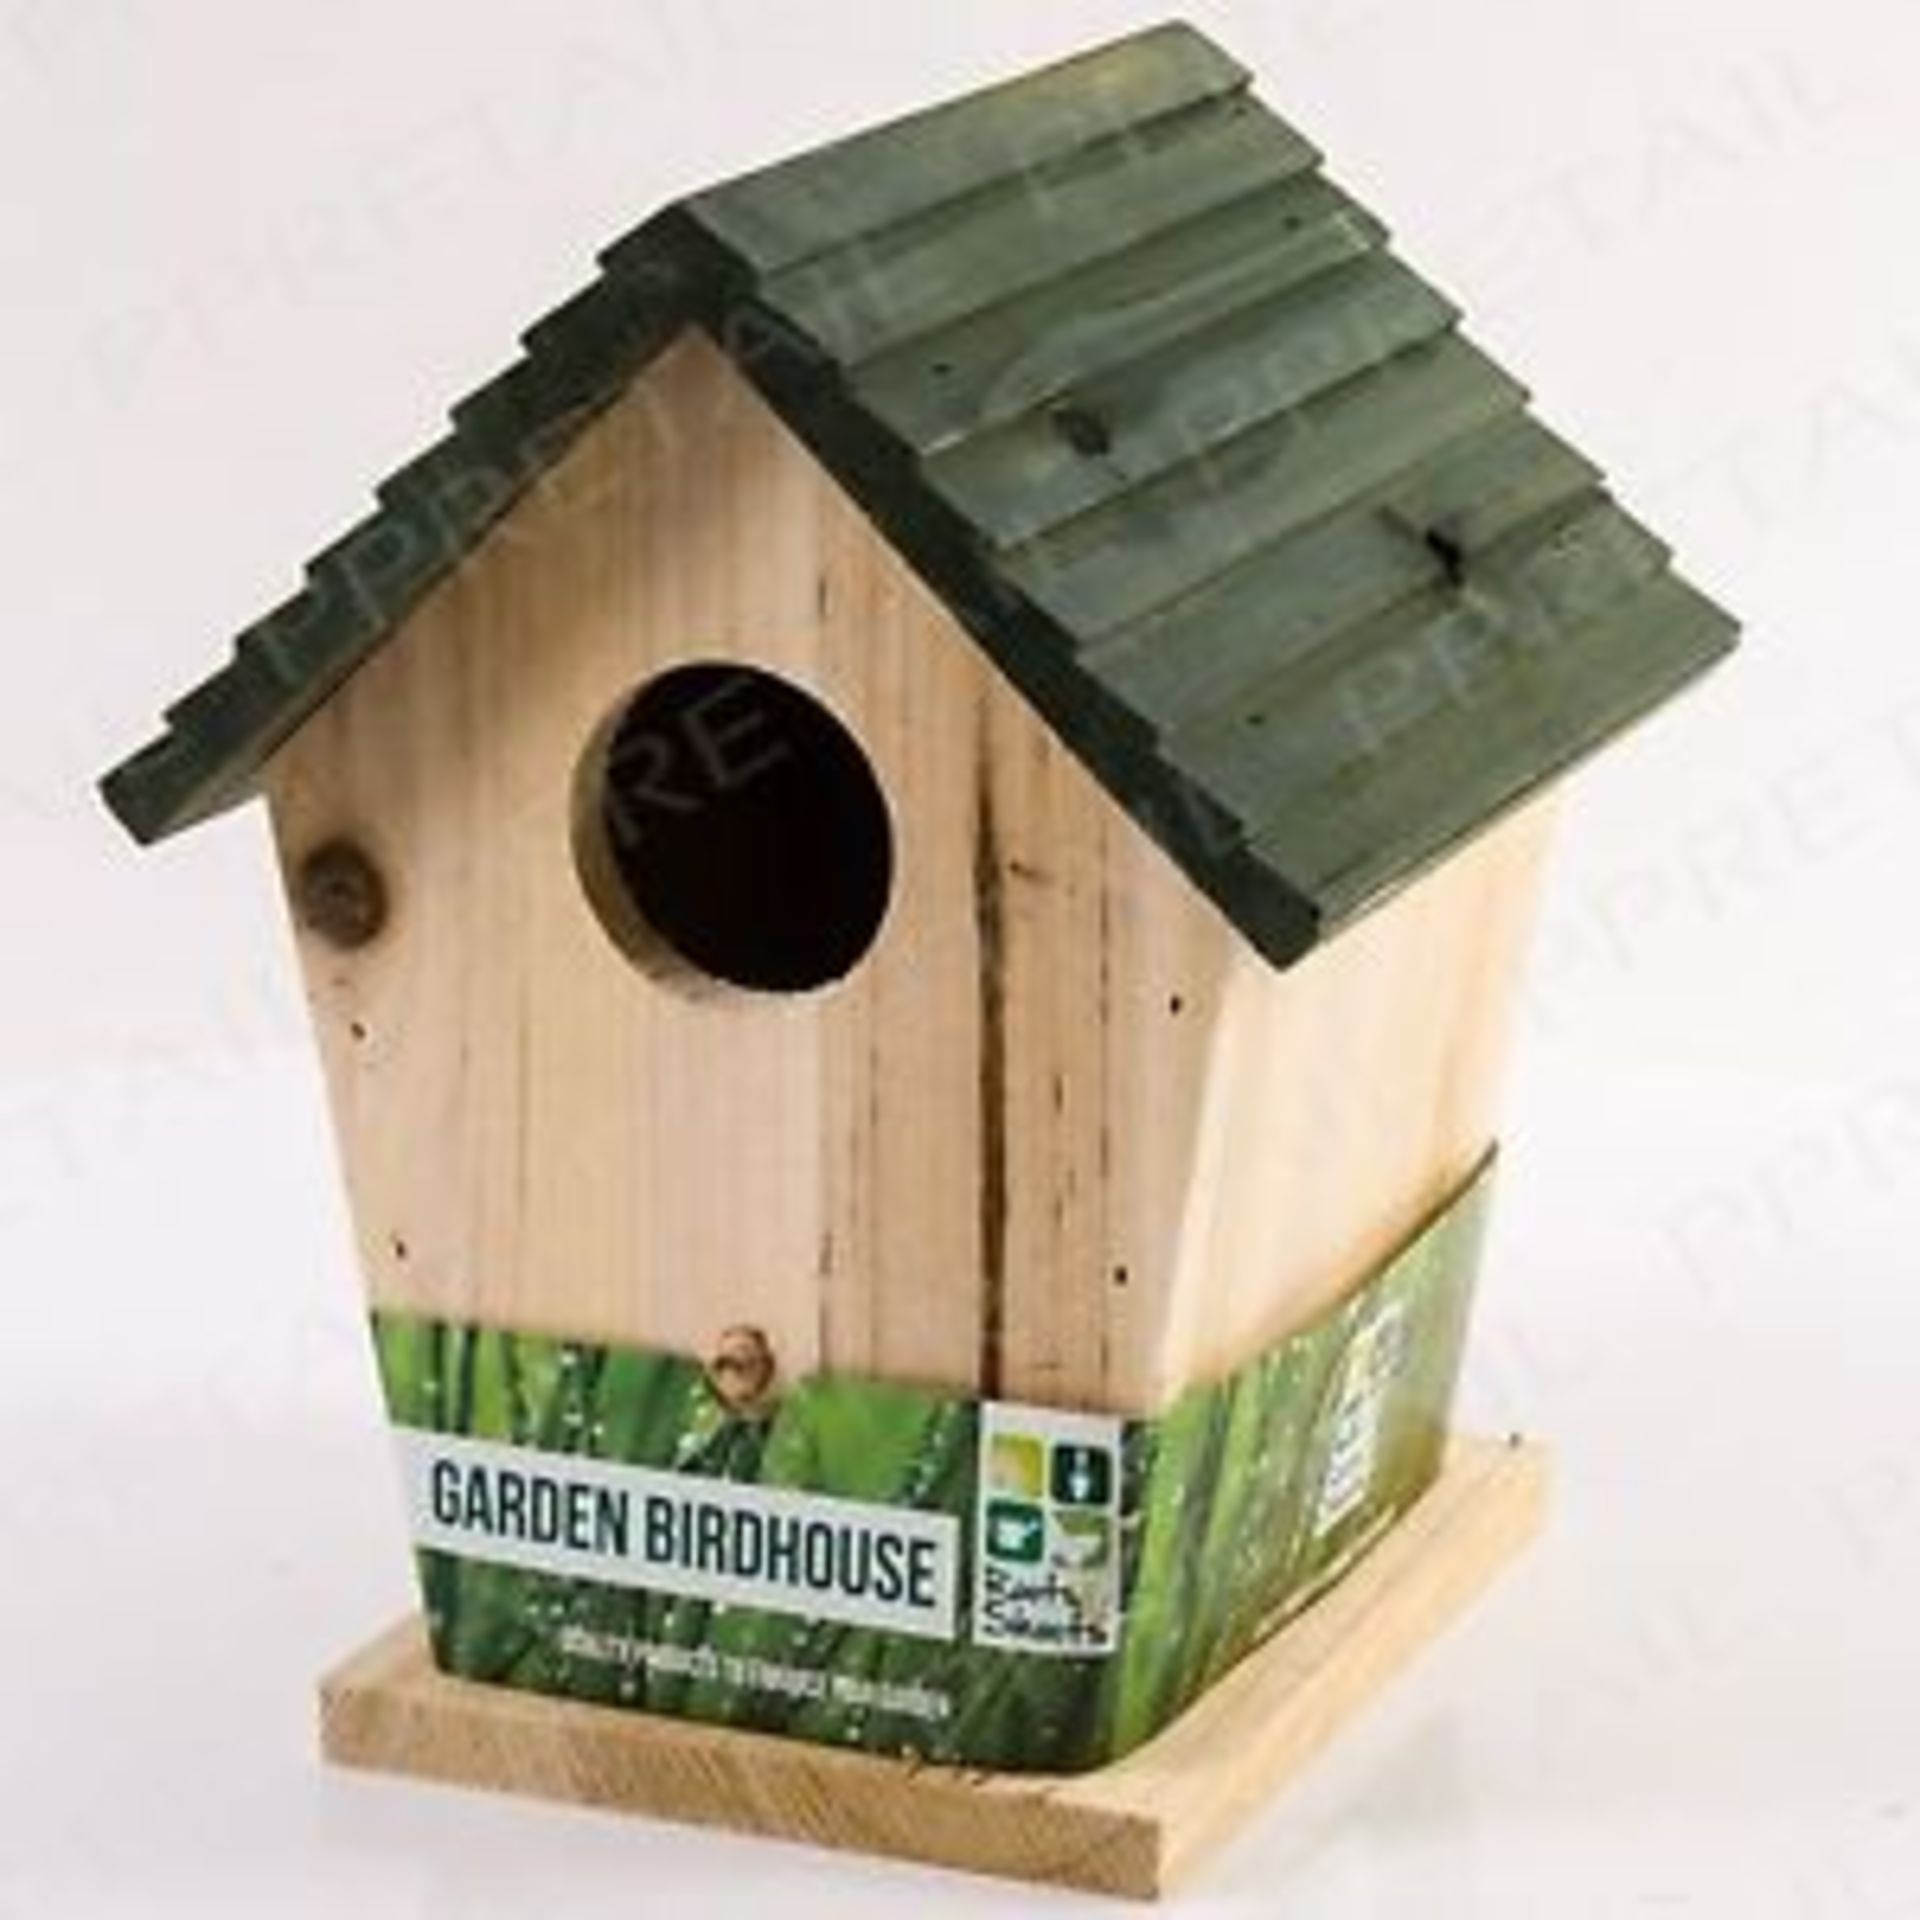 V Brand New Wooden Birdhouse With Pitched Roof And Perch X 2 Bid price to be multiplied by Two